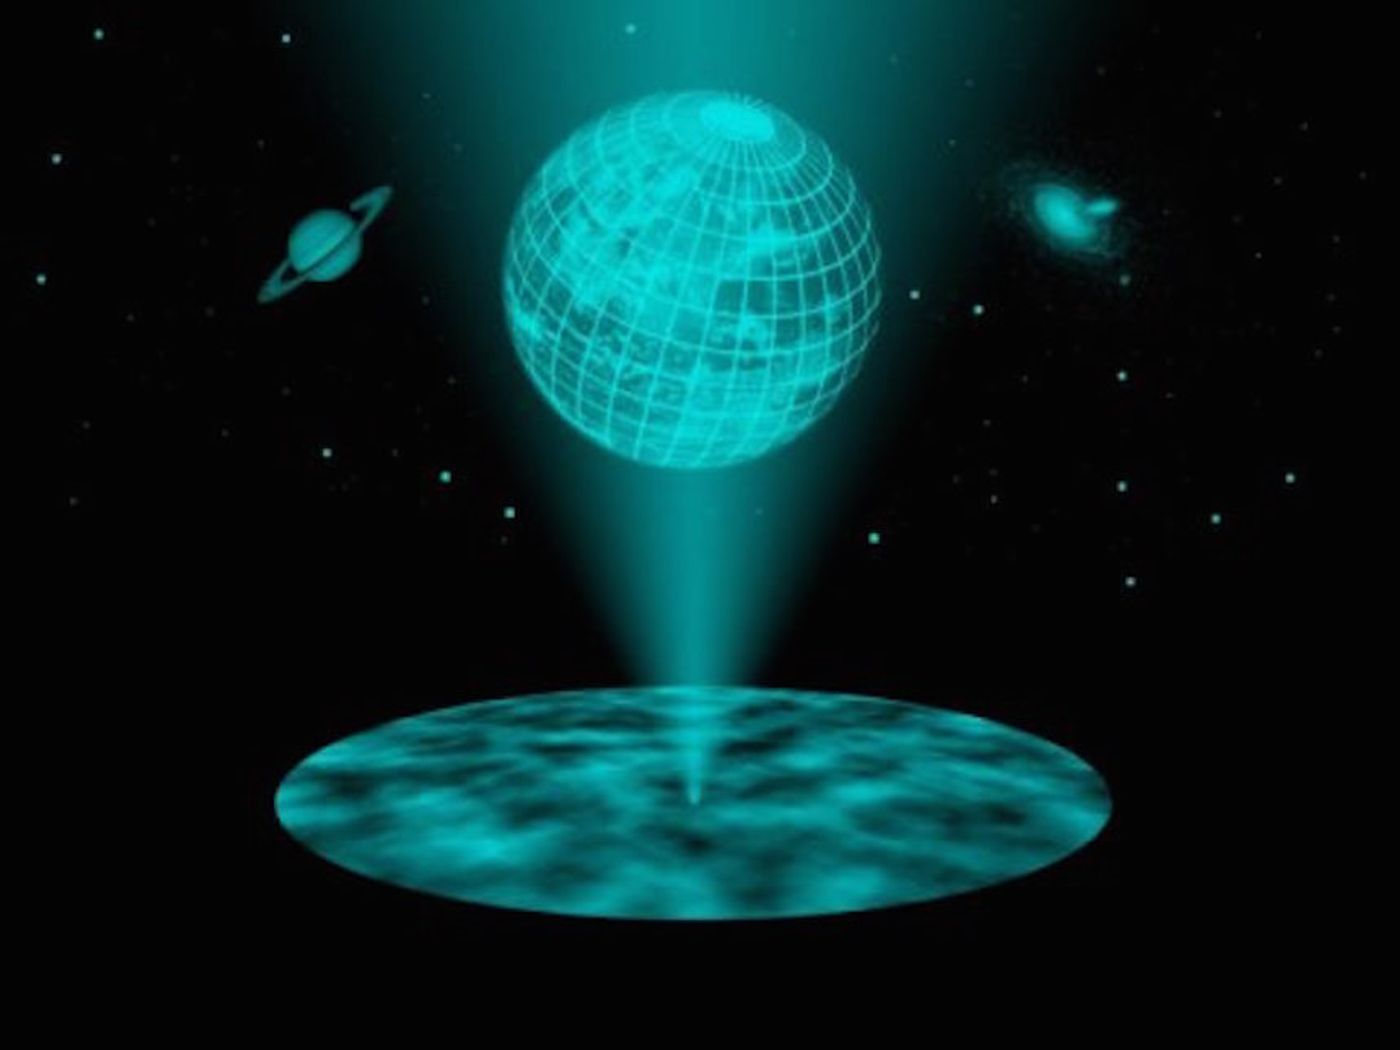 Is our universe a hologram?